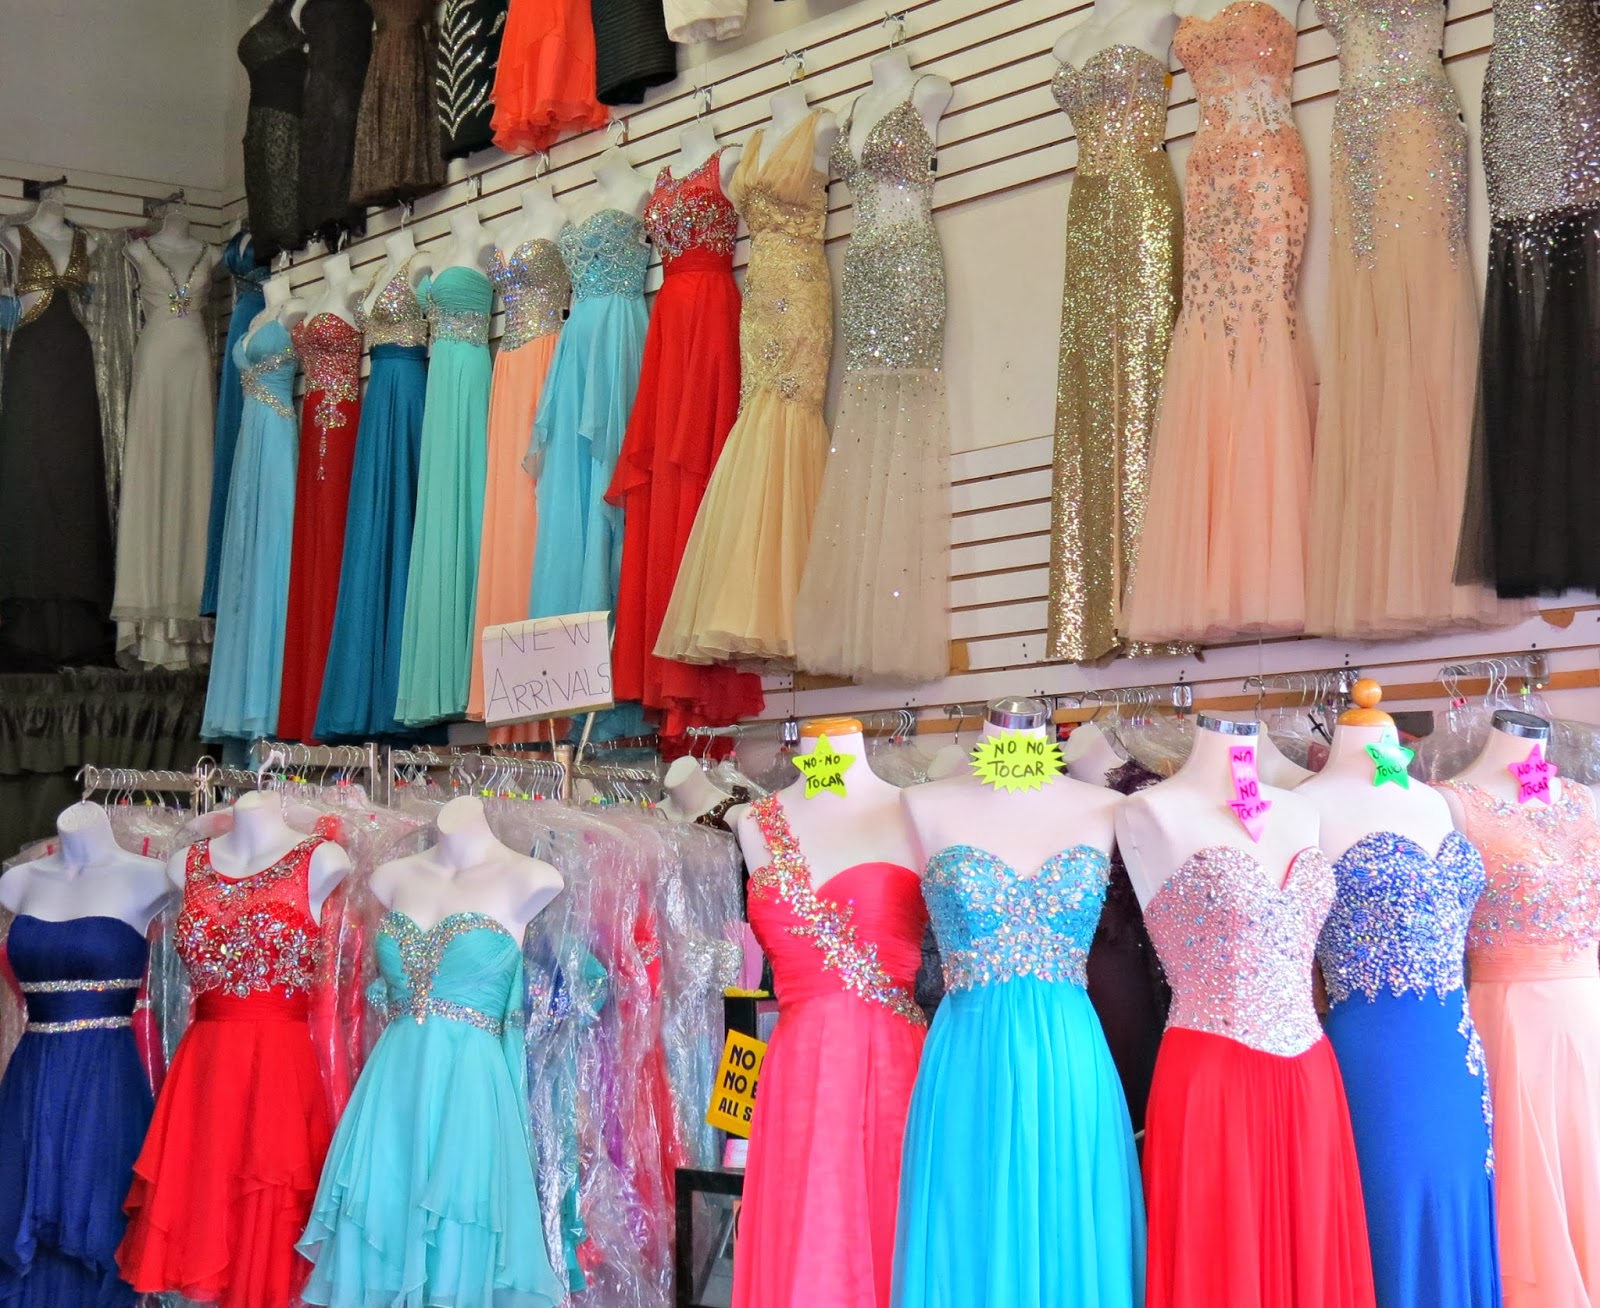 Pictured Below: Cirene Fashion located at 1200-C Santee St.